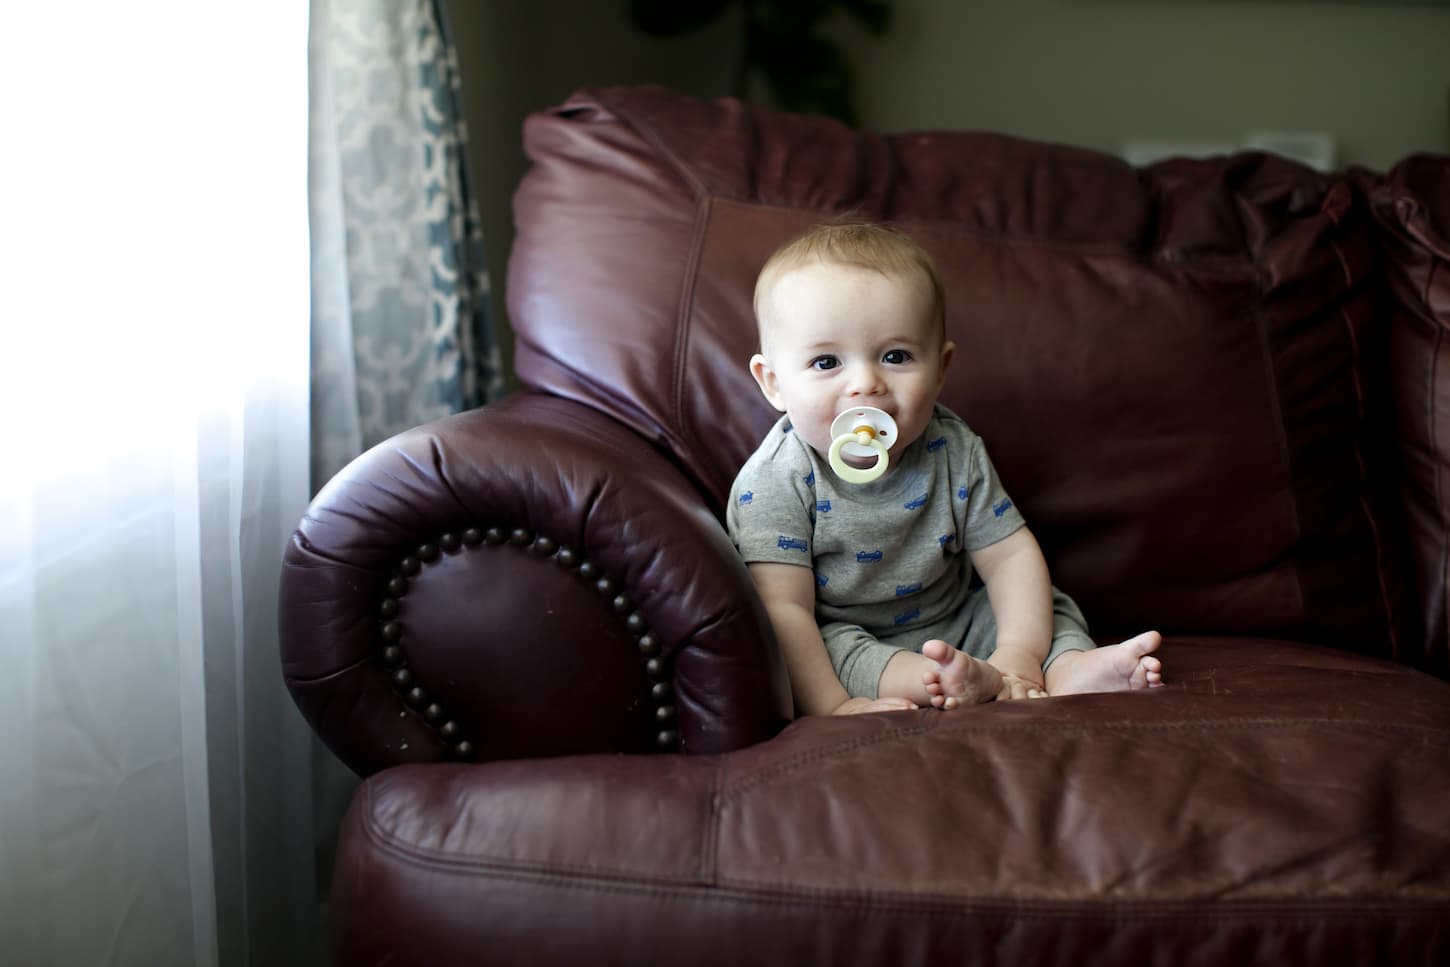 An image of a baby sitting on a brown leather sofa with a pacifier while looking at a camera.